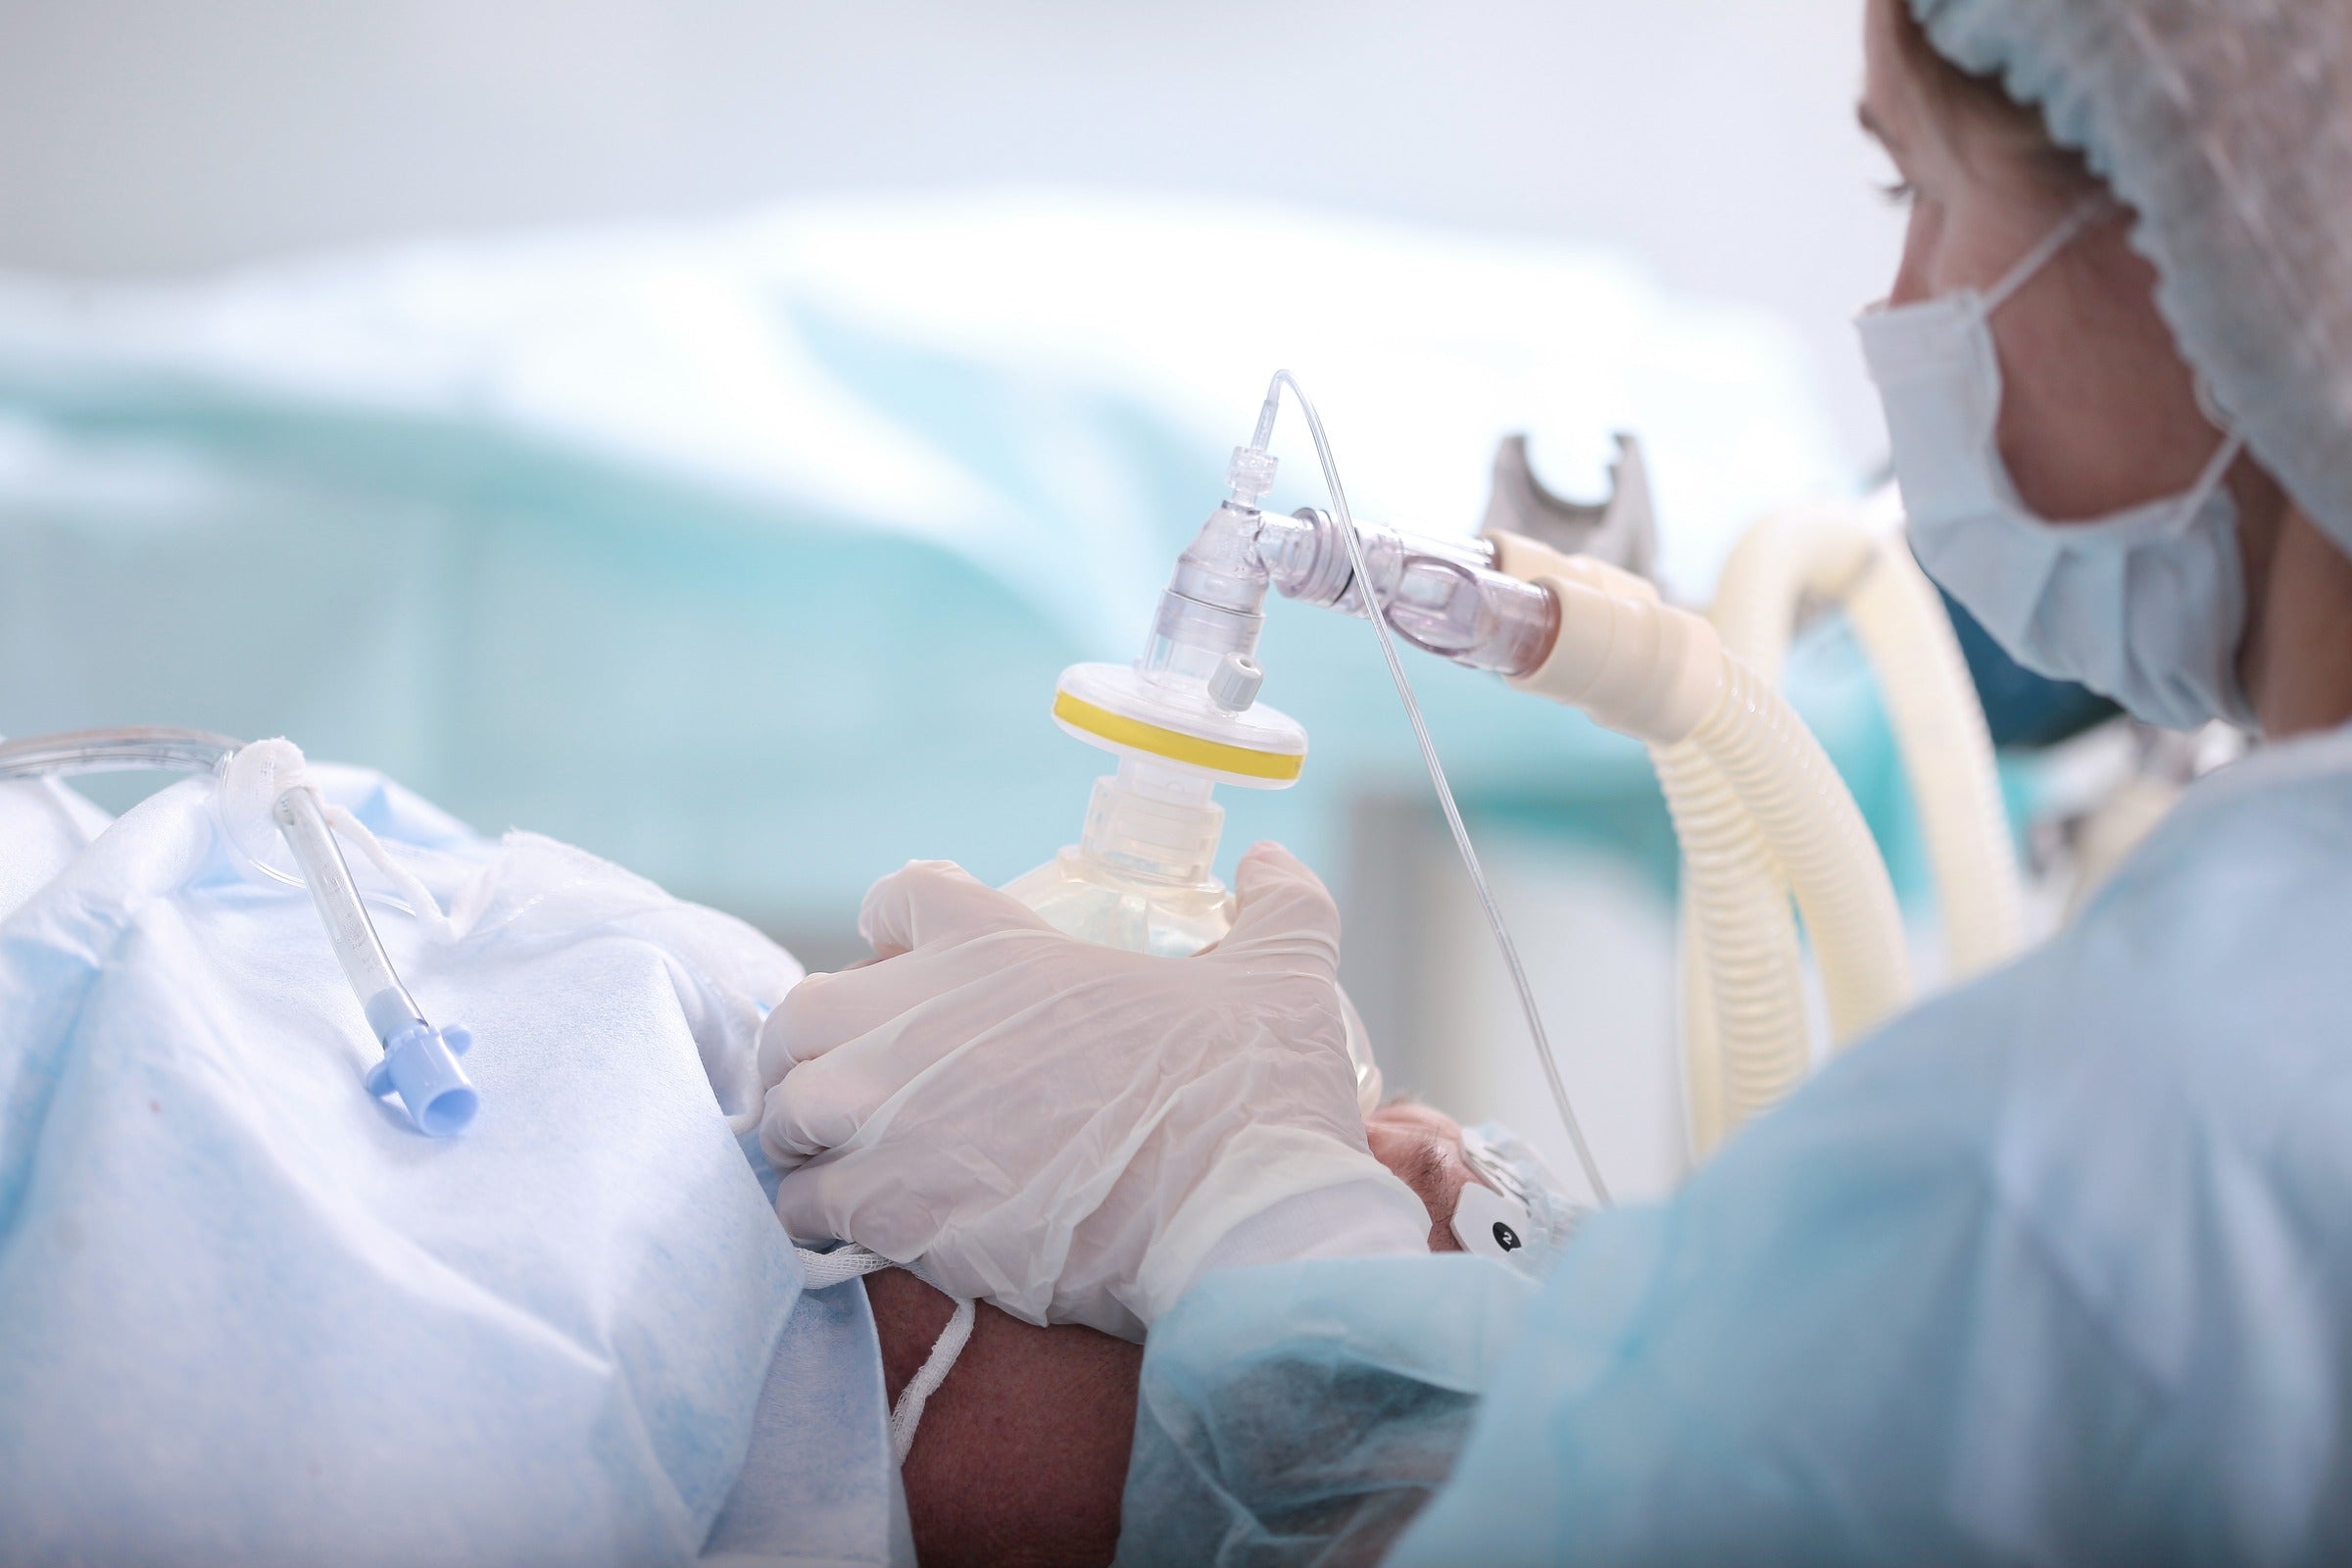 Anesthesia Complex surgeries can take longer to wake up